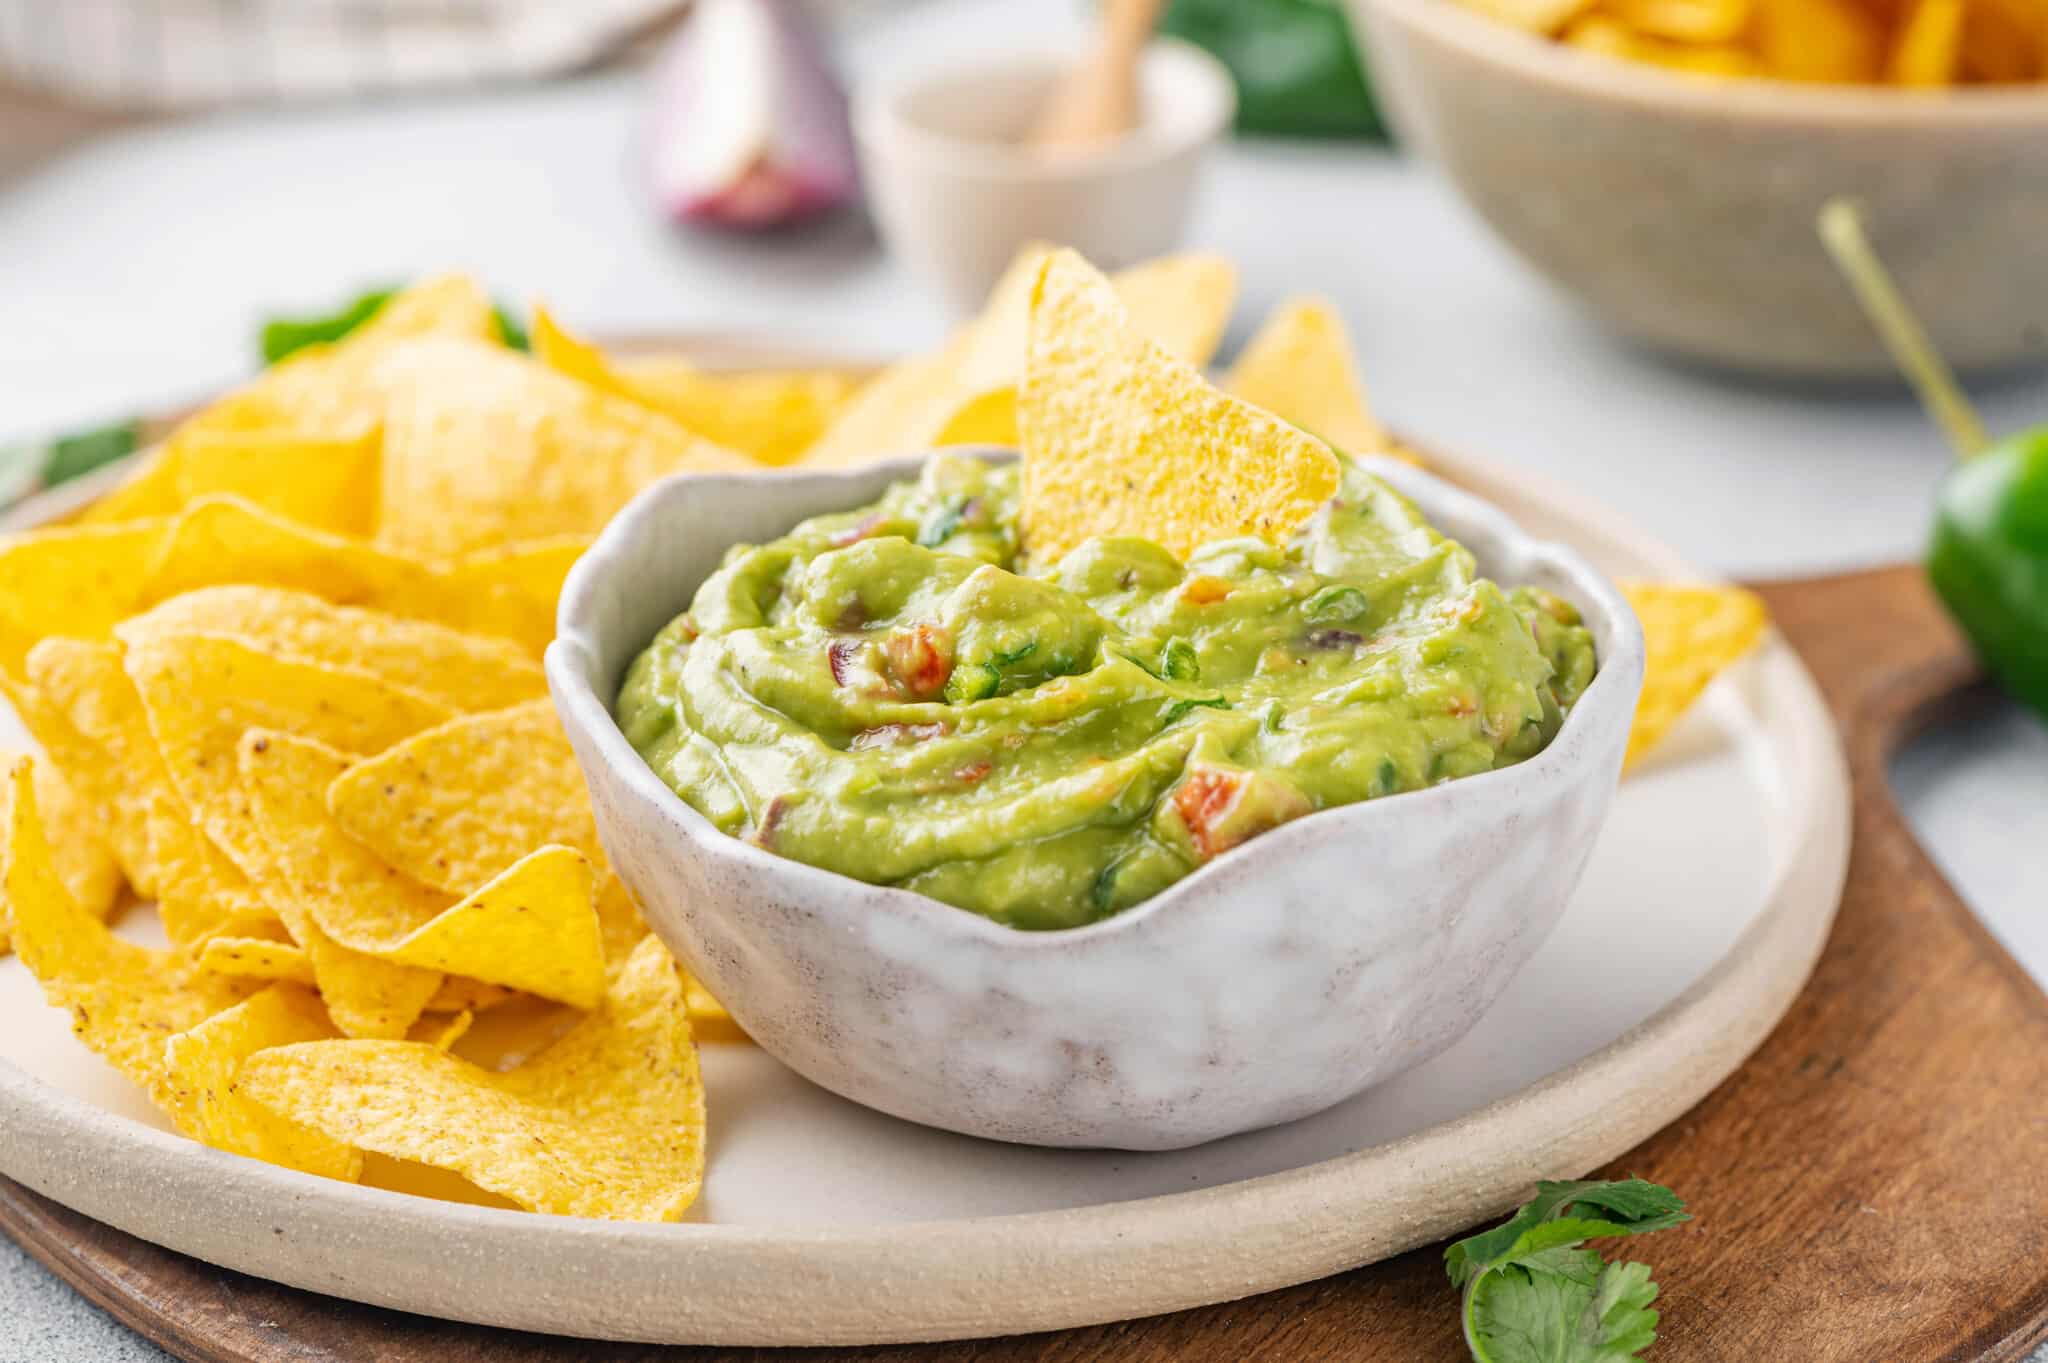 The Best Guacamole Recipe to Serve with Chips